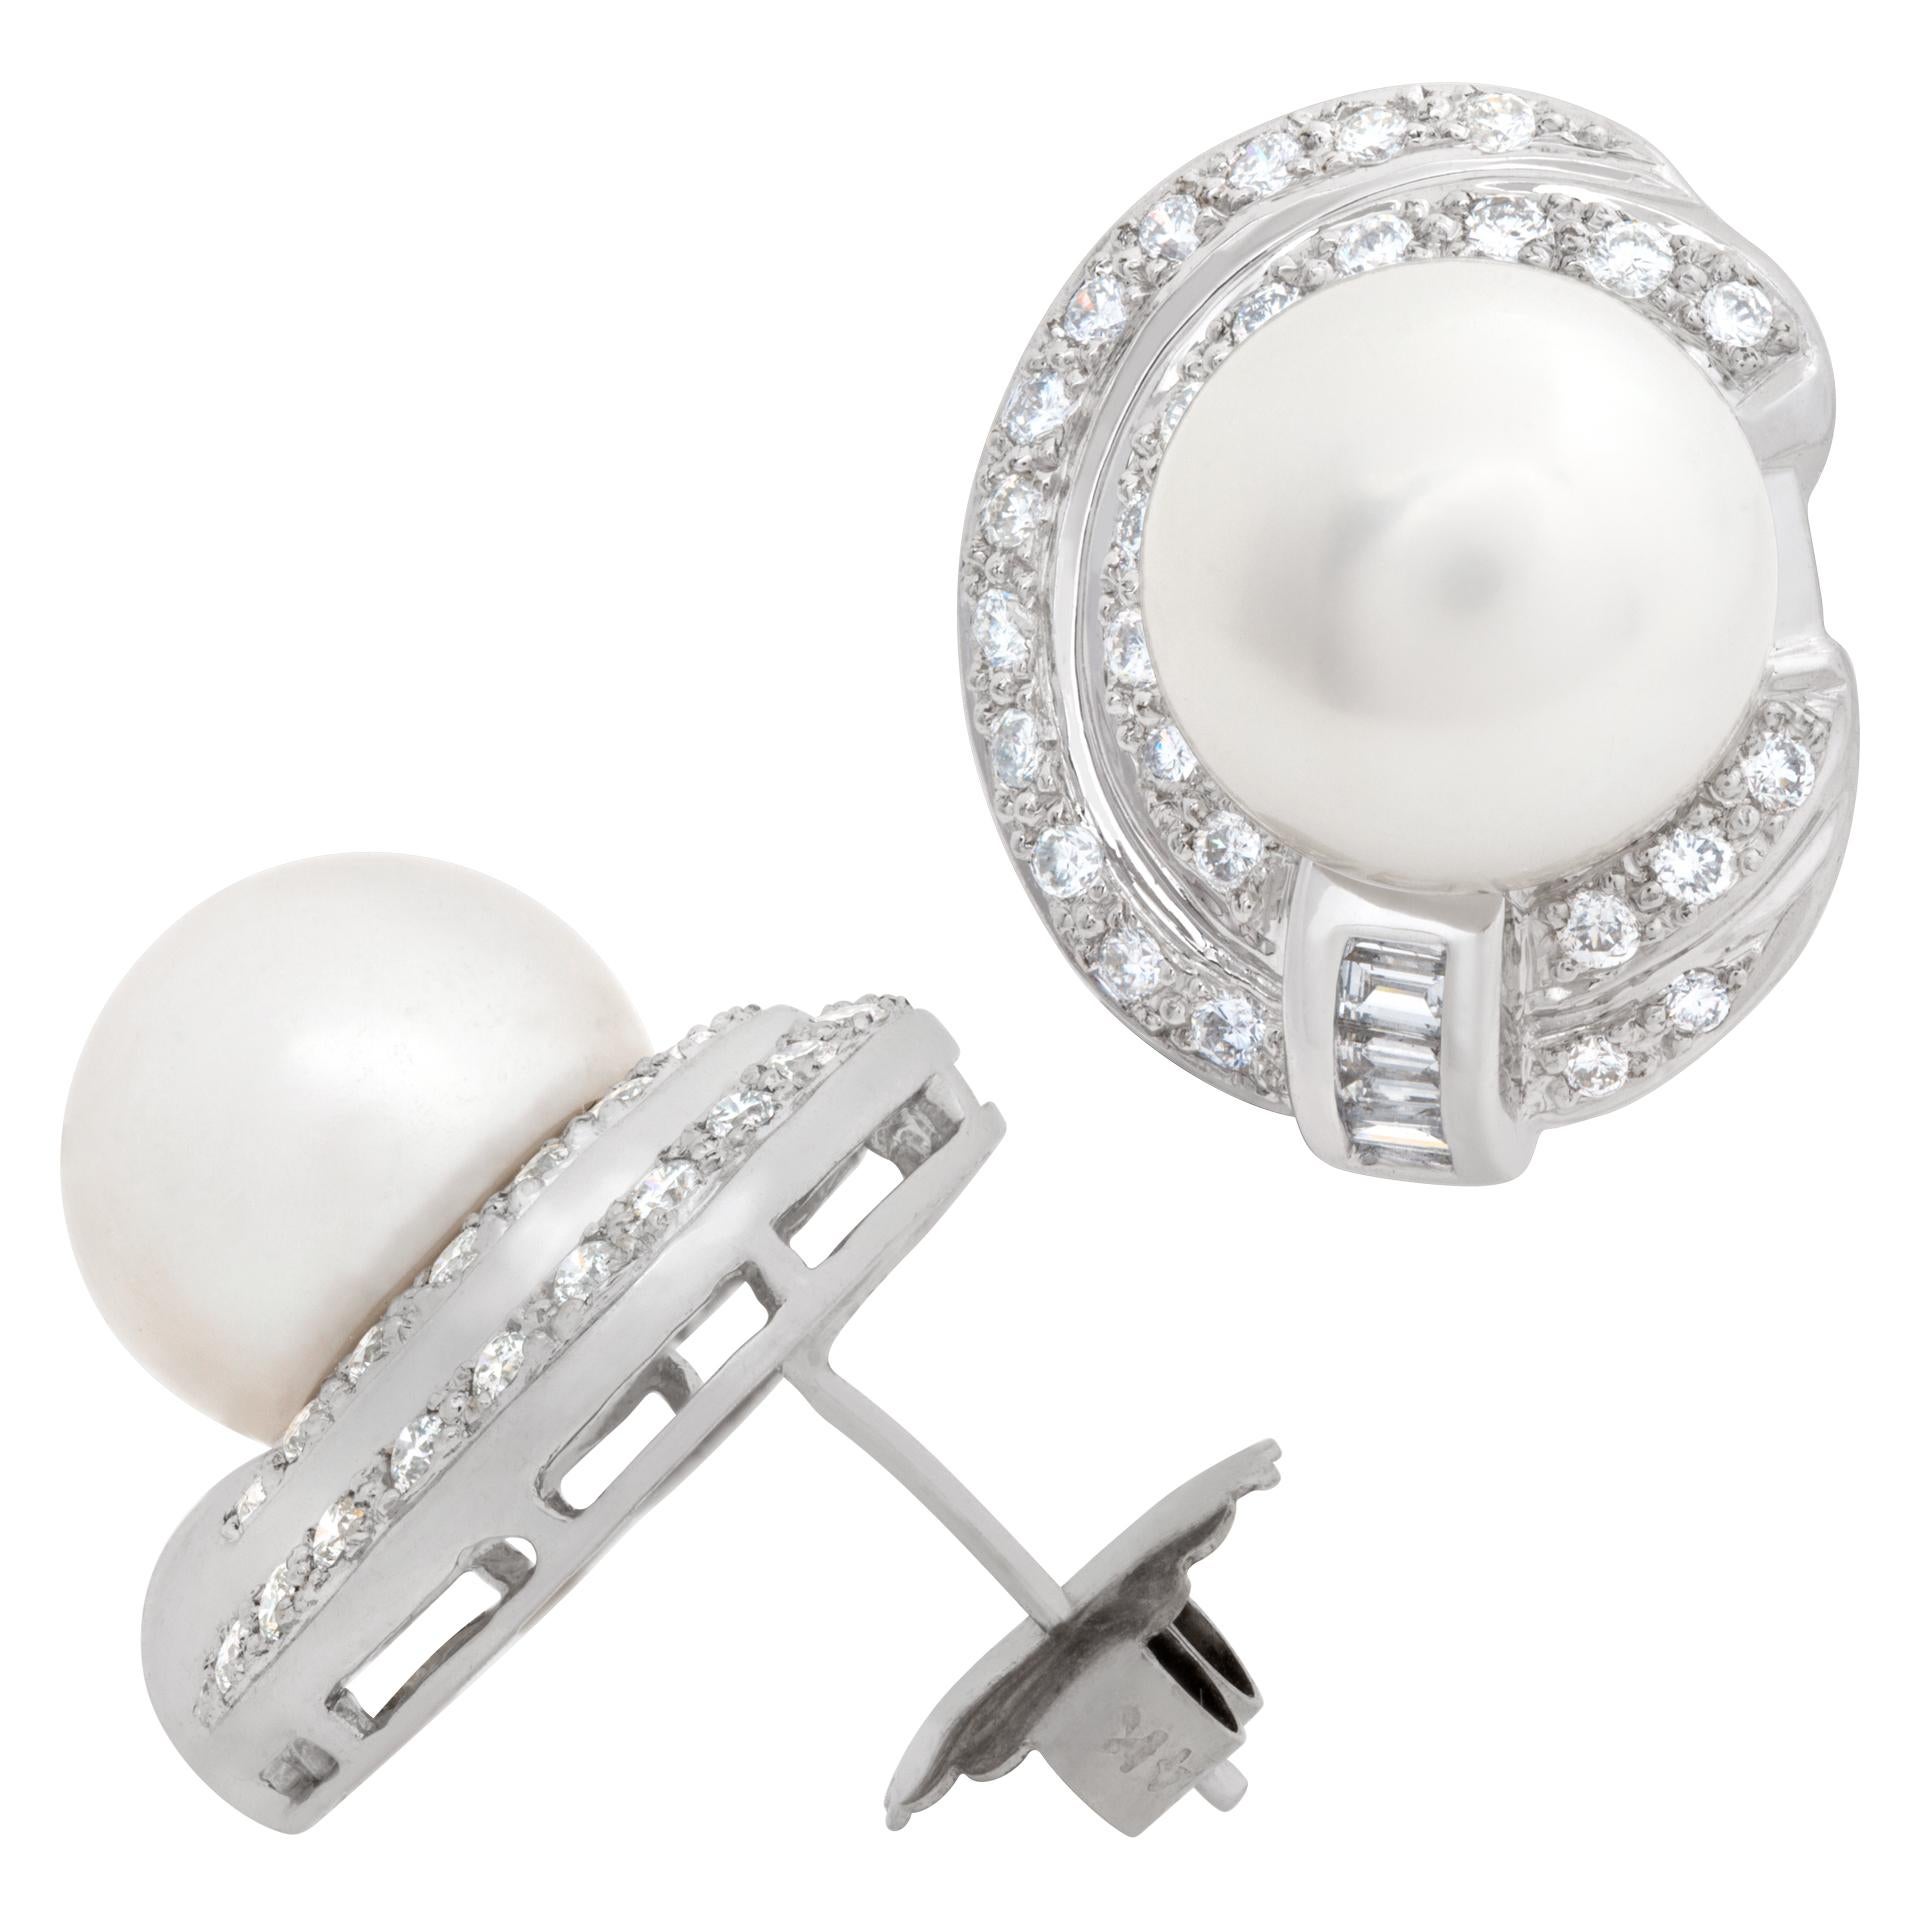 Pearl Earrings in 14k White Gold In Excellent Condition For Sale In Surfside, FL